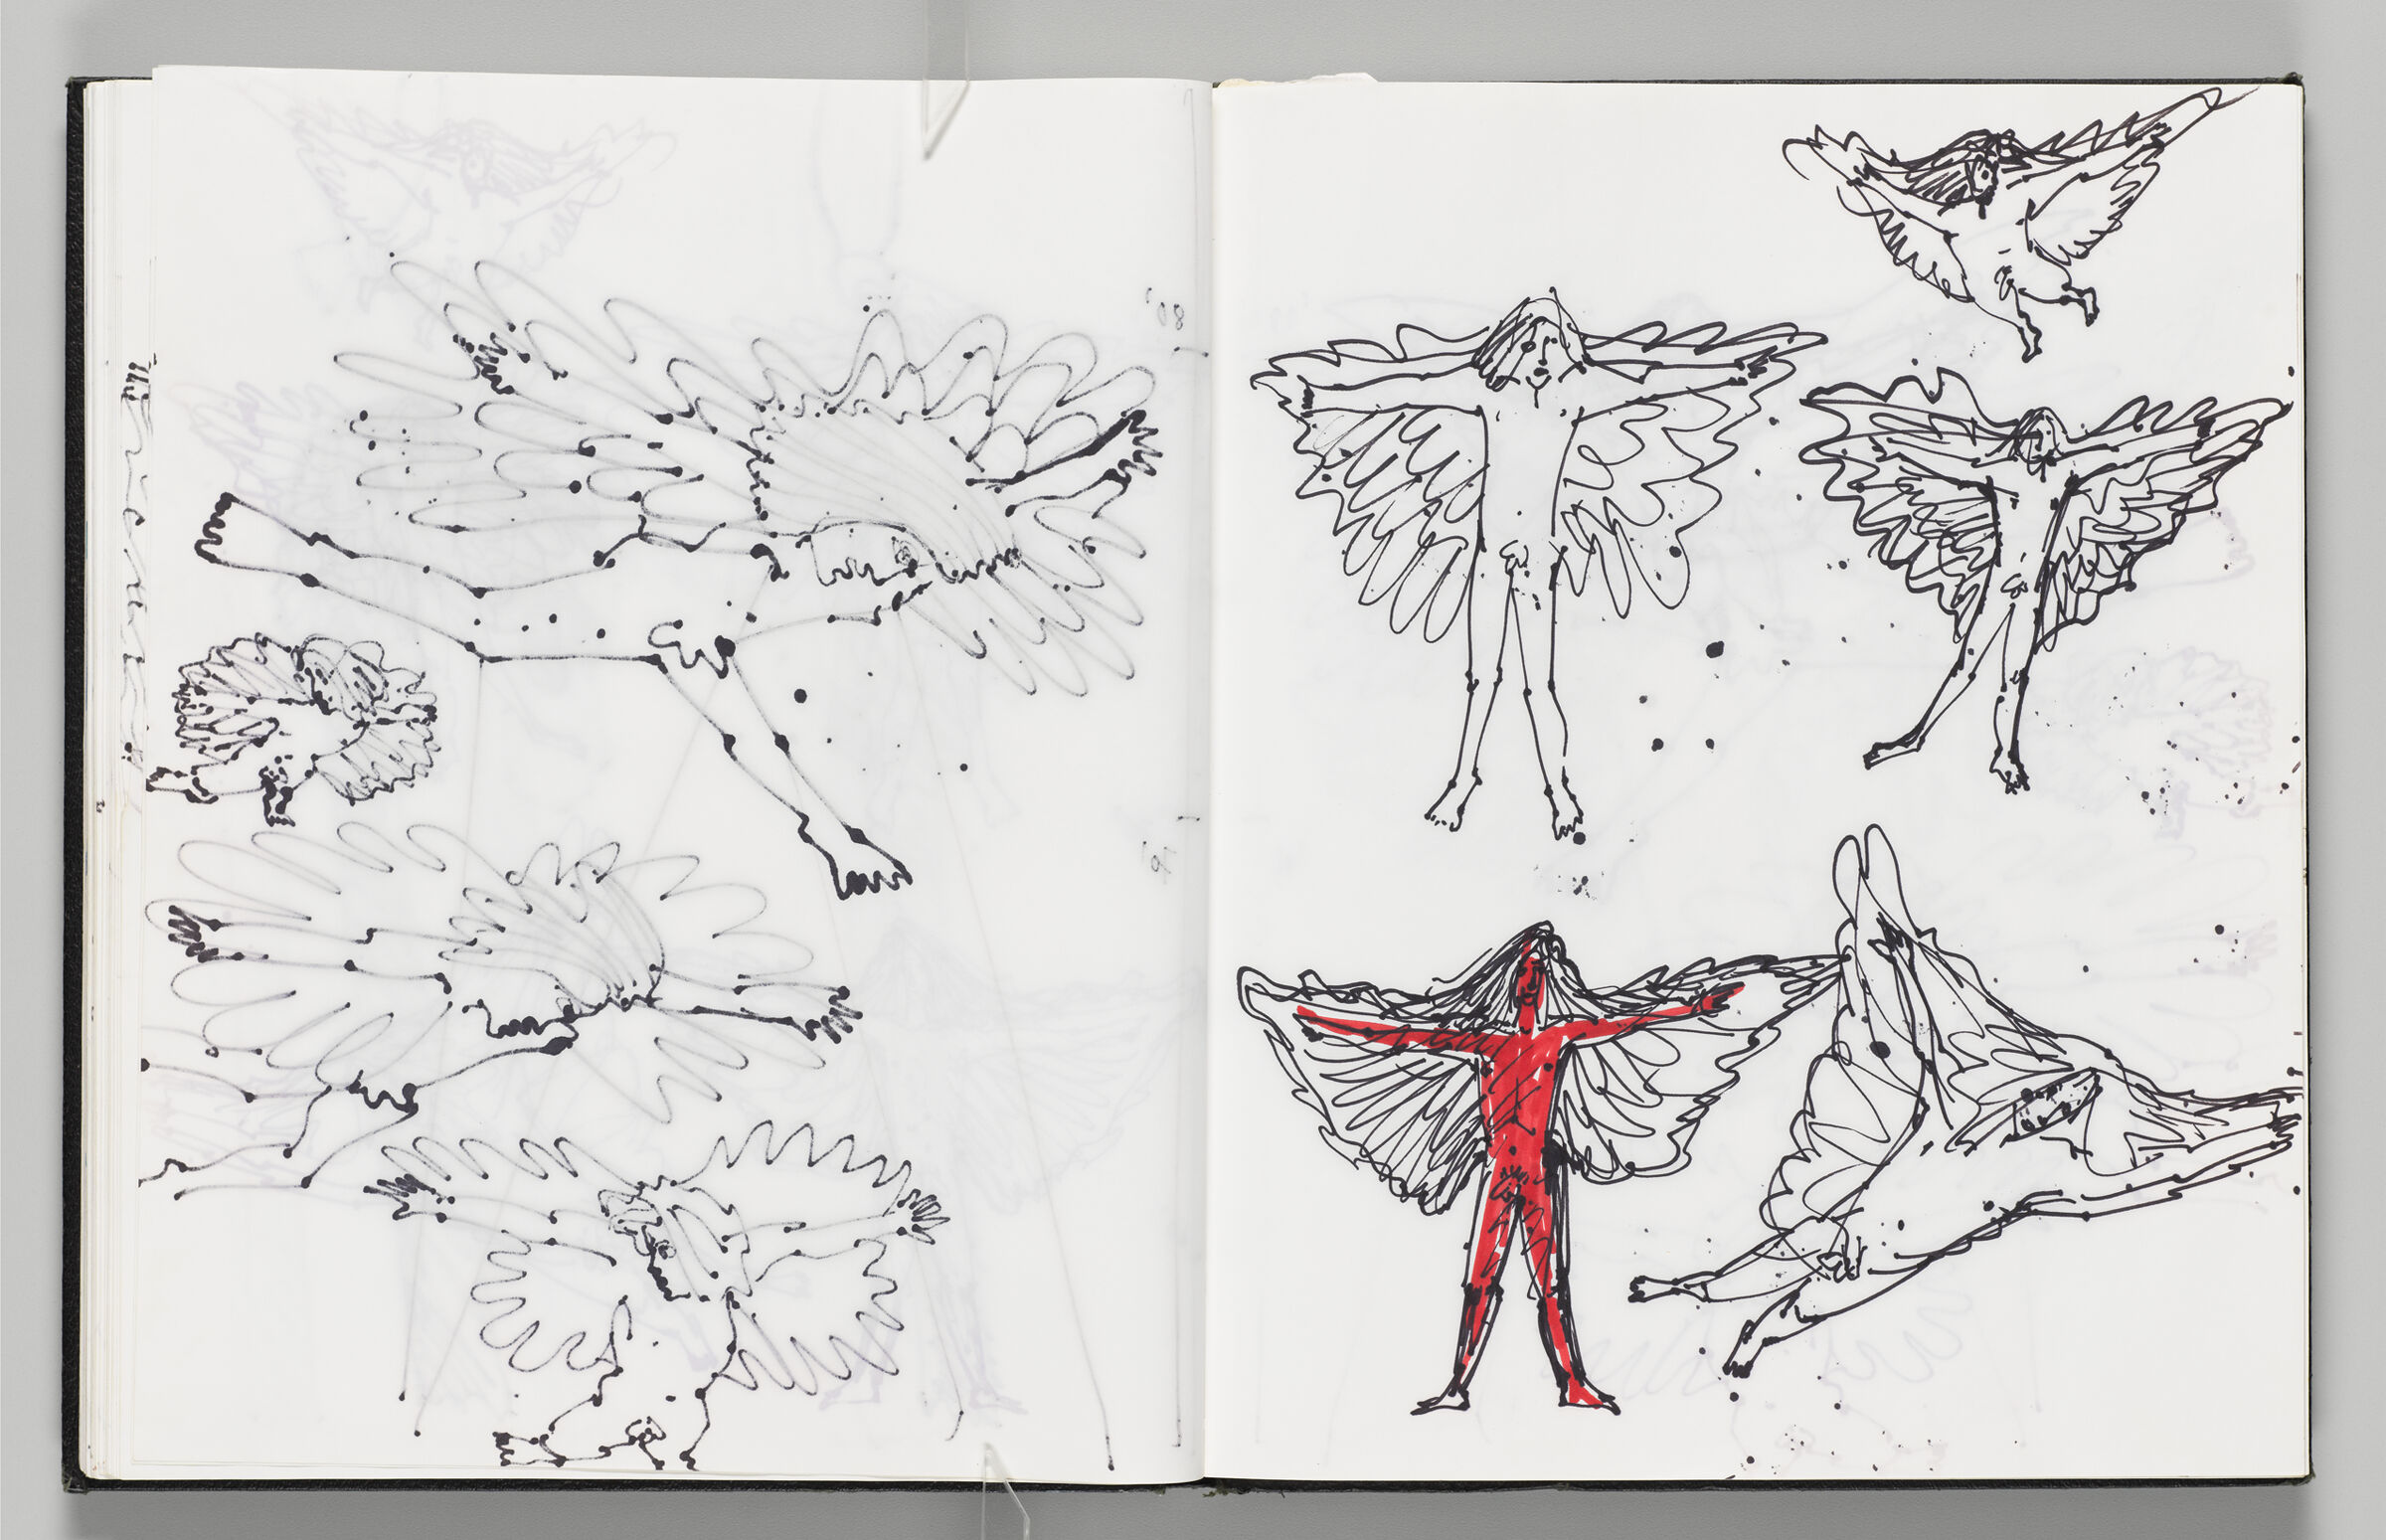 Untitled (Bleed-Through Of Previous Page, Left Page); Untitled (Sketches Of Icarus With Faint Color Transfer, Right Page)